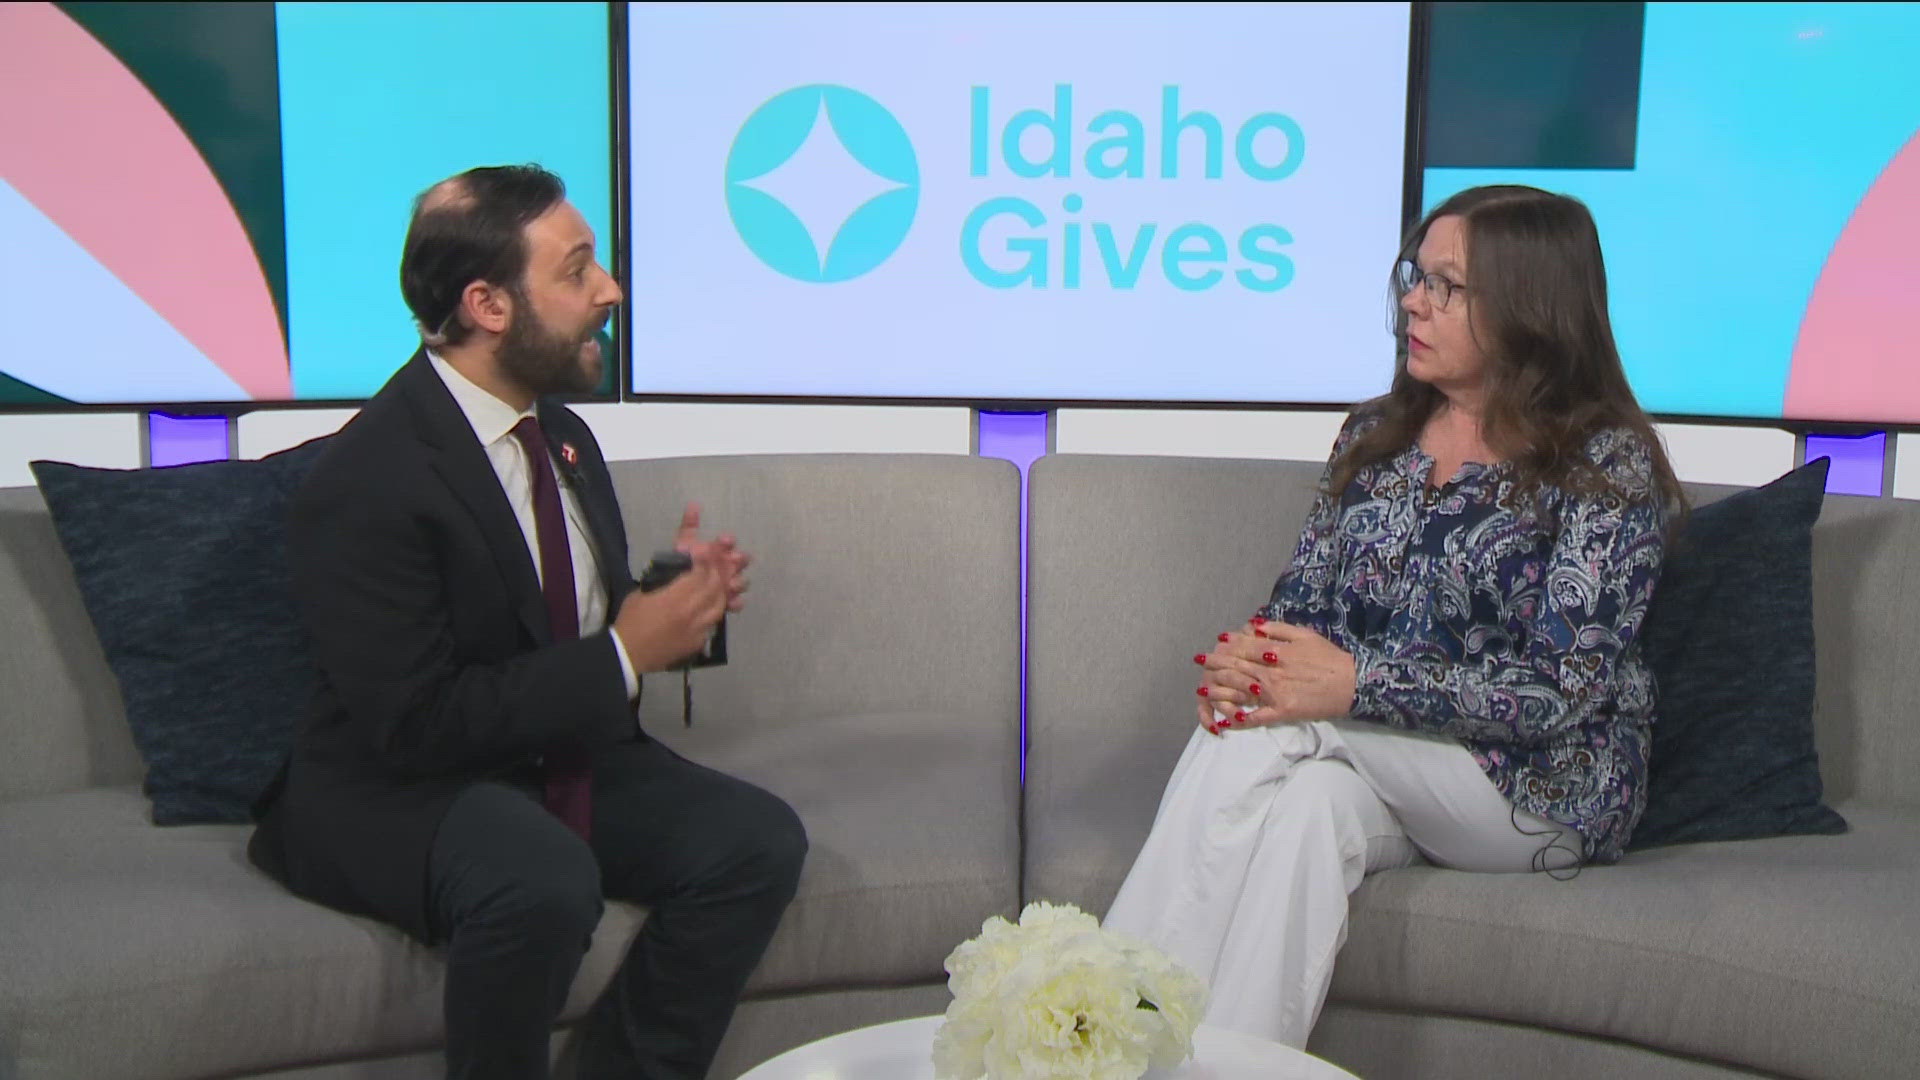 Idaho Gives, the state’s largest celebration of charitable giving, runs through Thursday. More than $2.4 million has been raised this year for Gem State nonprofits.